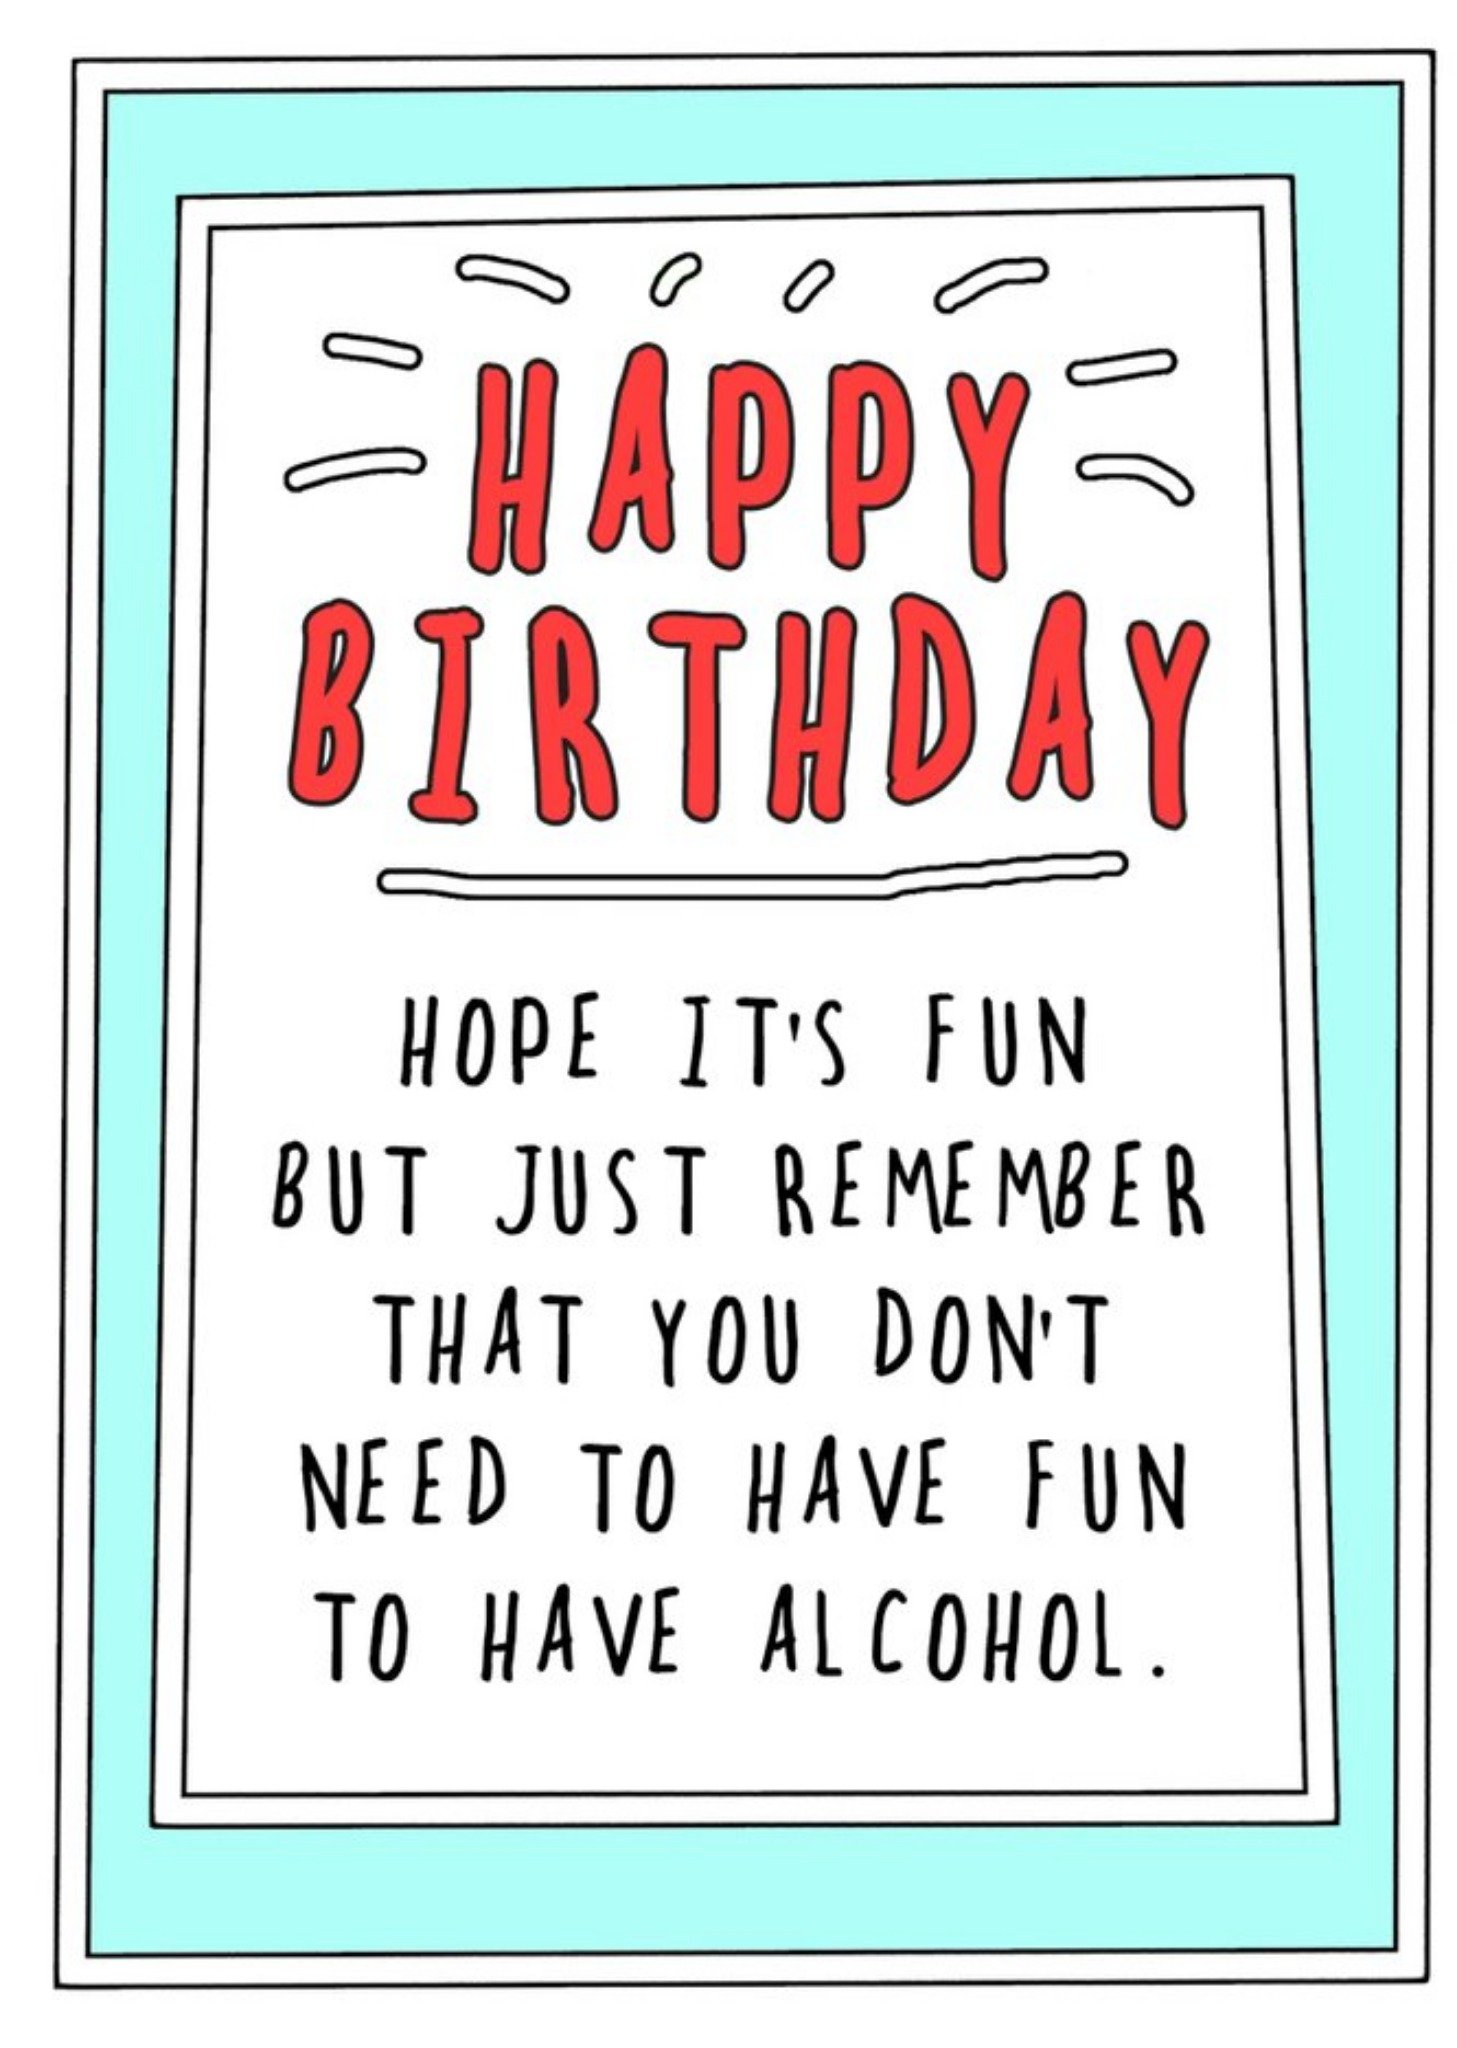 Go La La Funny Cheeky Happy Birthday Hope Its Fun But Just Remember Alcohol Card, Large